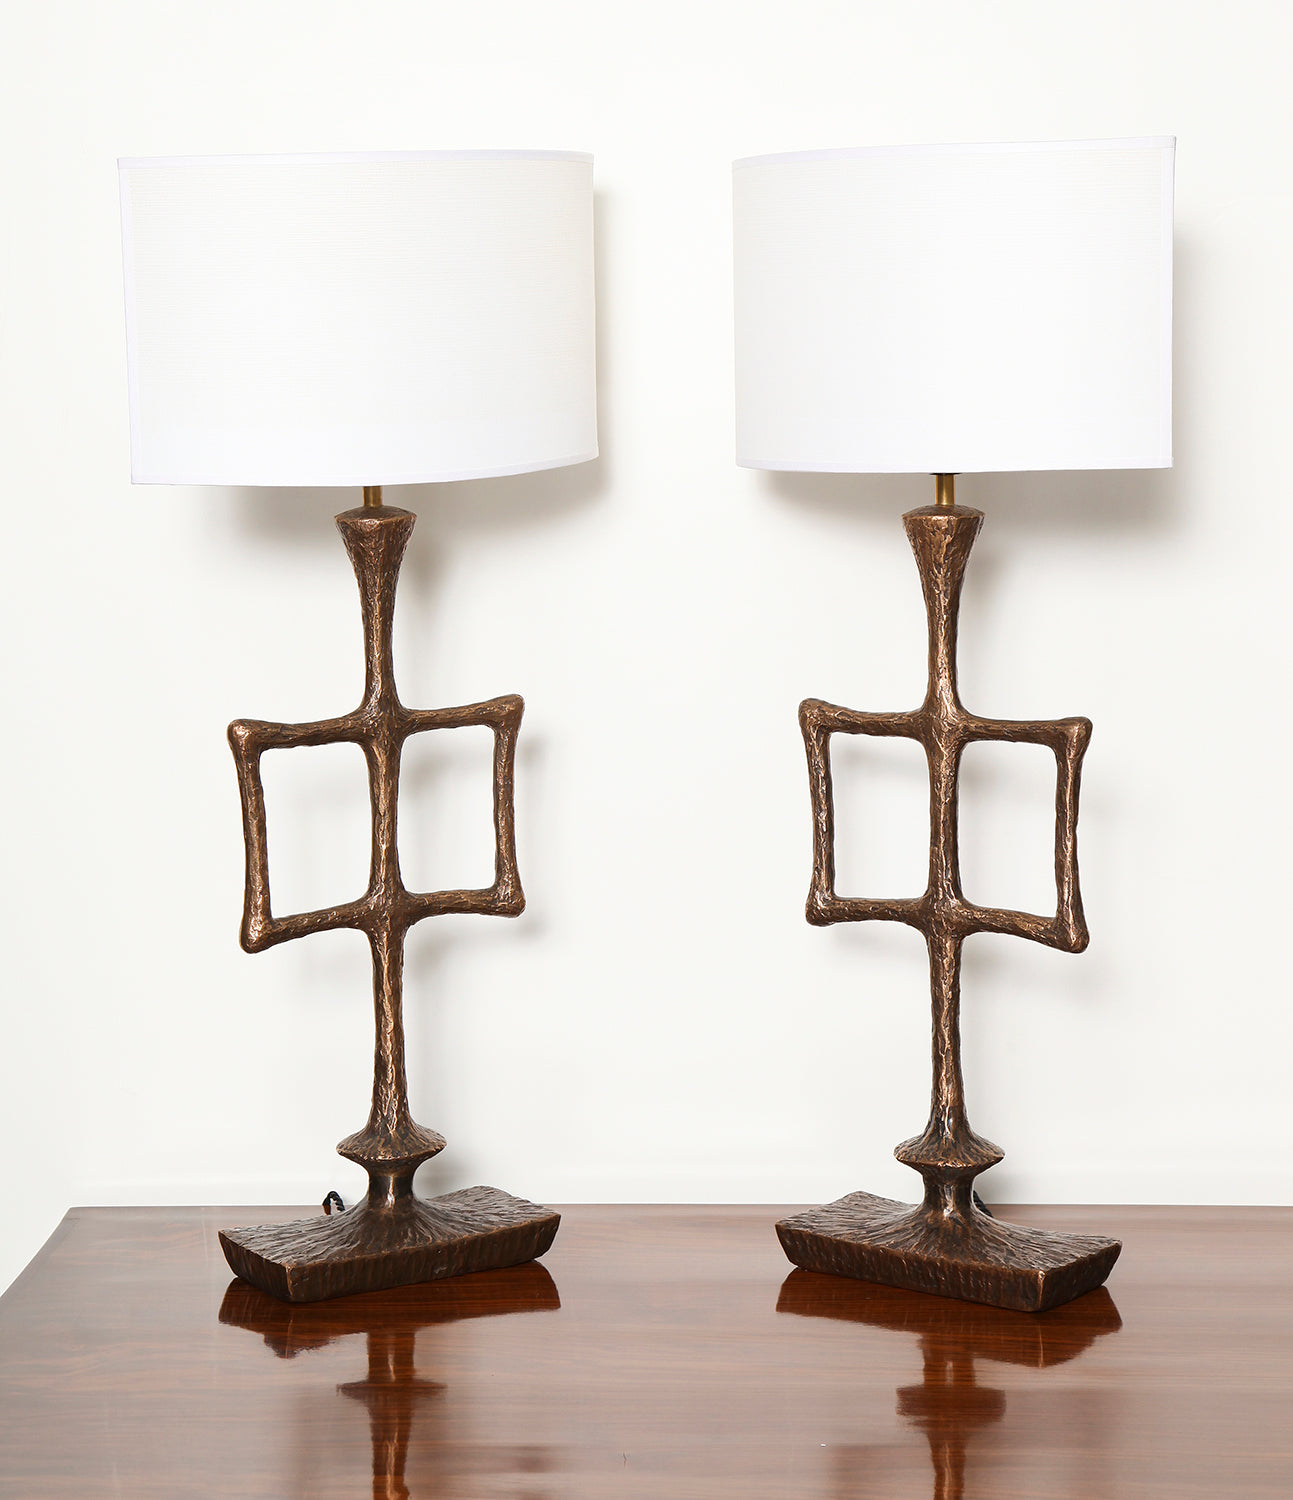 Limited Edition “Tahoma” Table Lamps By Alexandre Logé